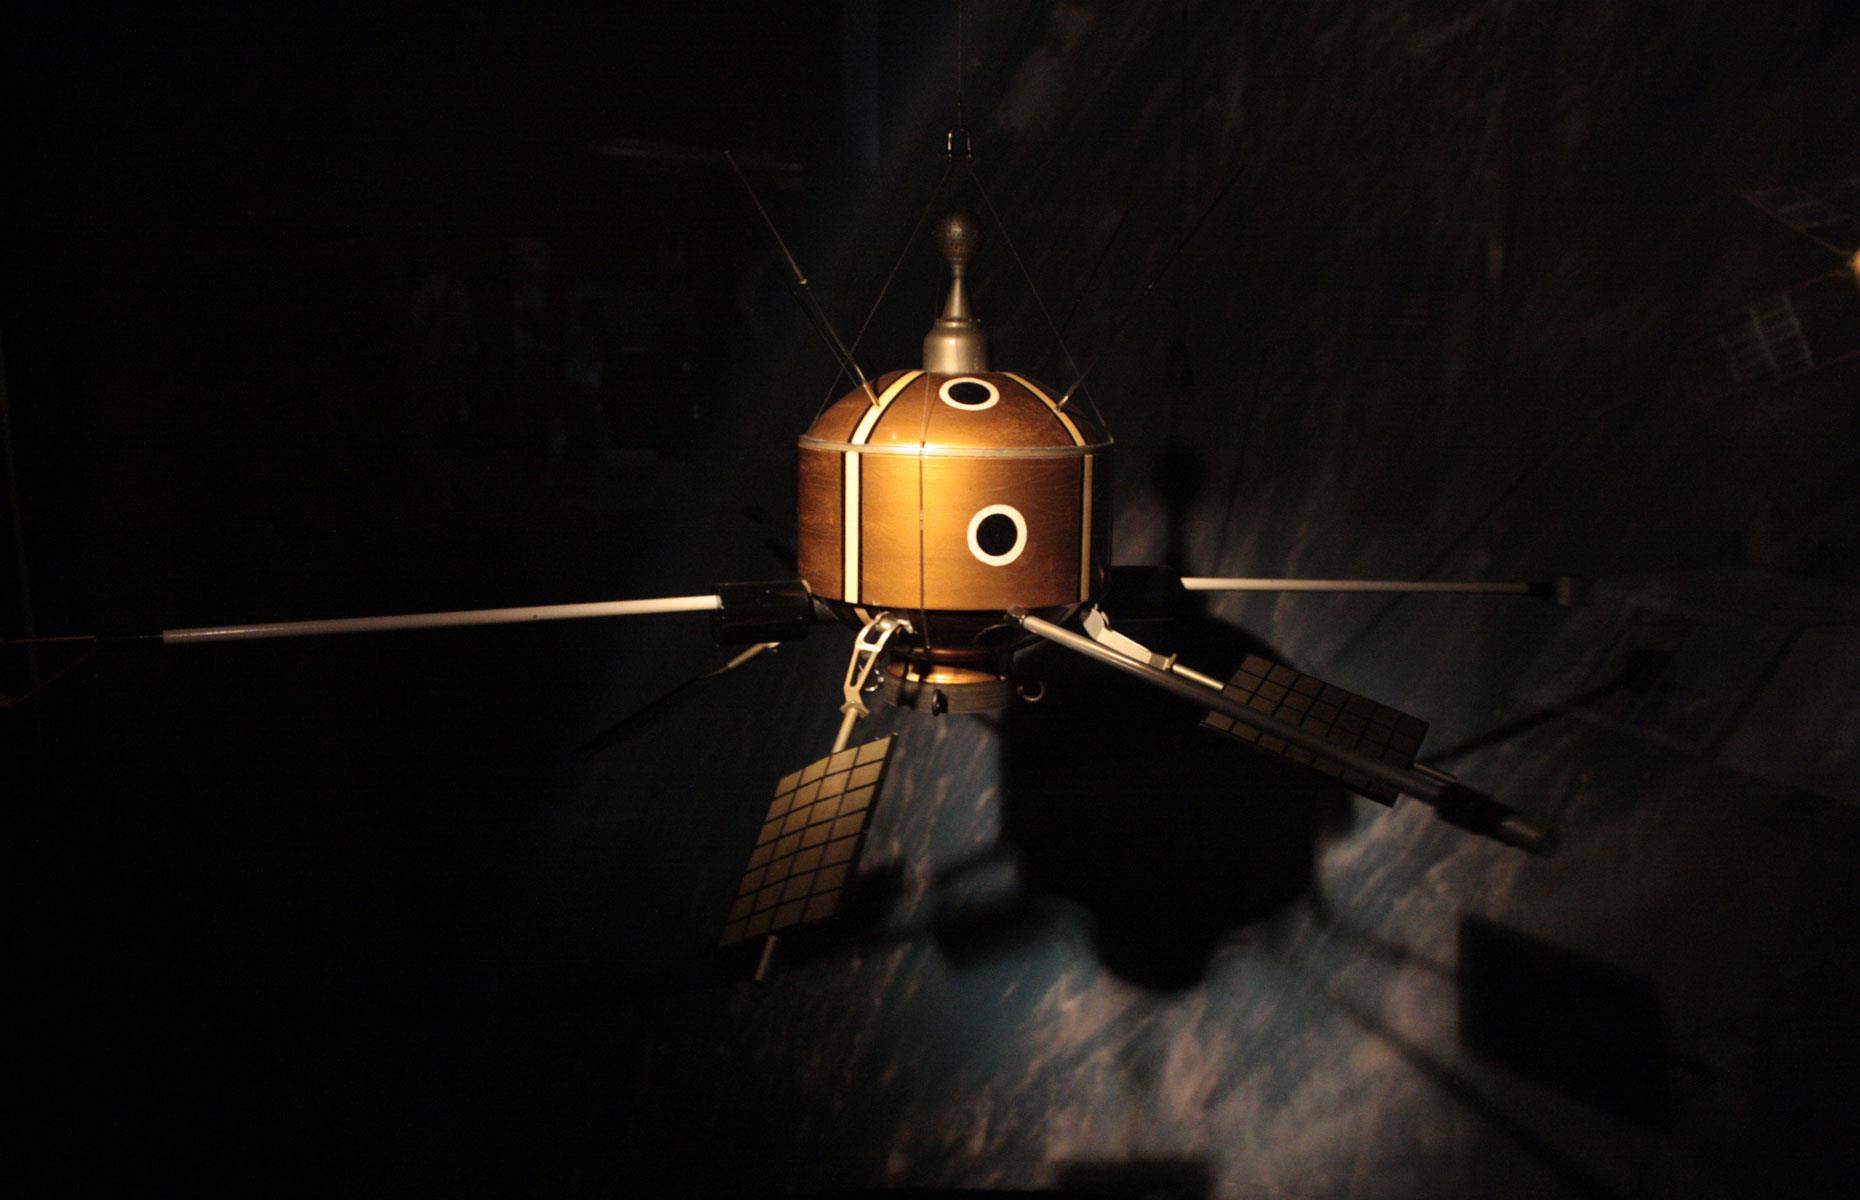 <p>Ariel 1, which was named after a spirit in Shakespeare's <em>The Tempest</em>, was the UK's first satellite and the first that wasn't American or Soviet. Launched on 26 April 1962, the British spacecraft remained in orbit until 24 April 1976 when it came crashing down to Earth.</p>